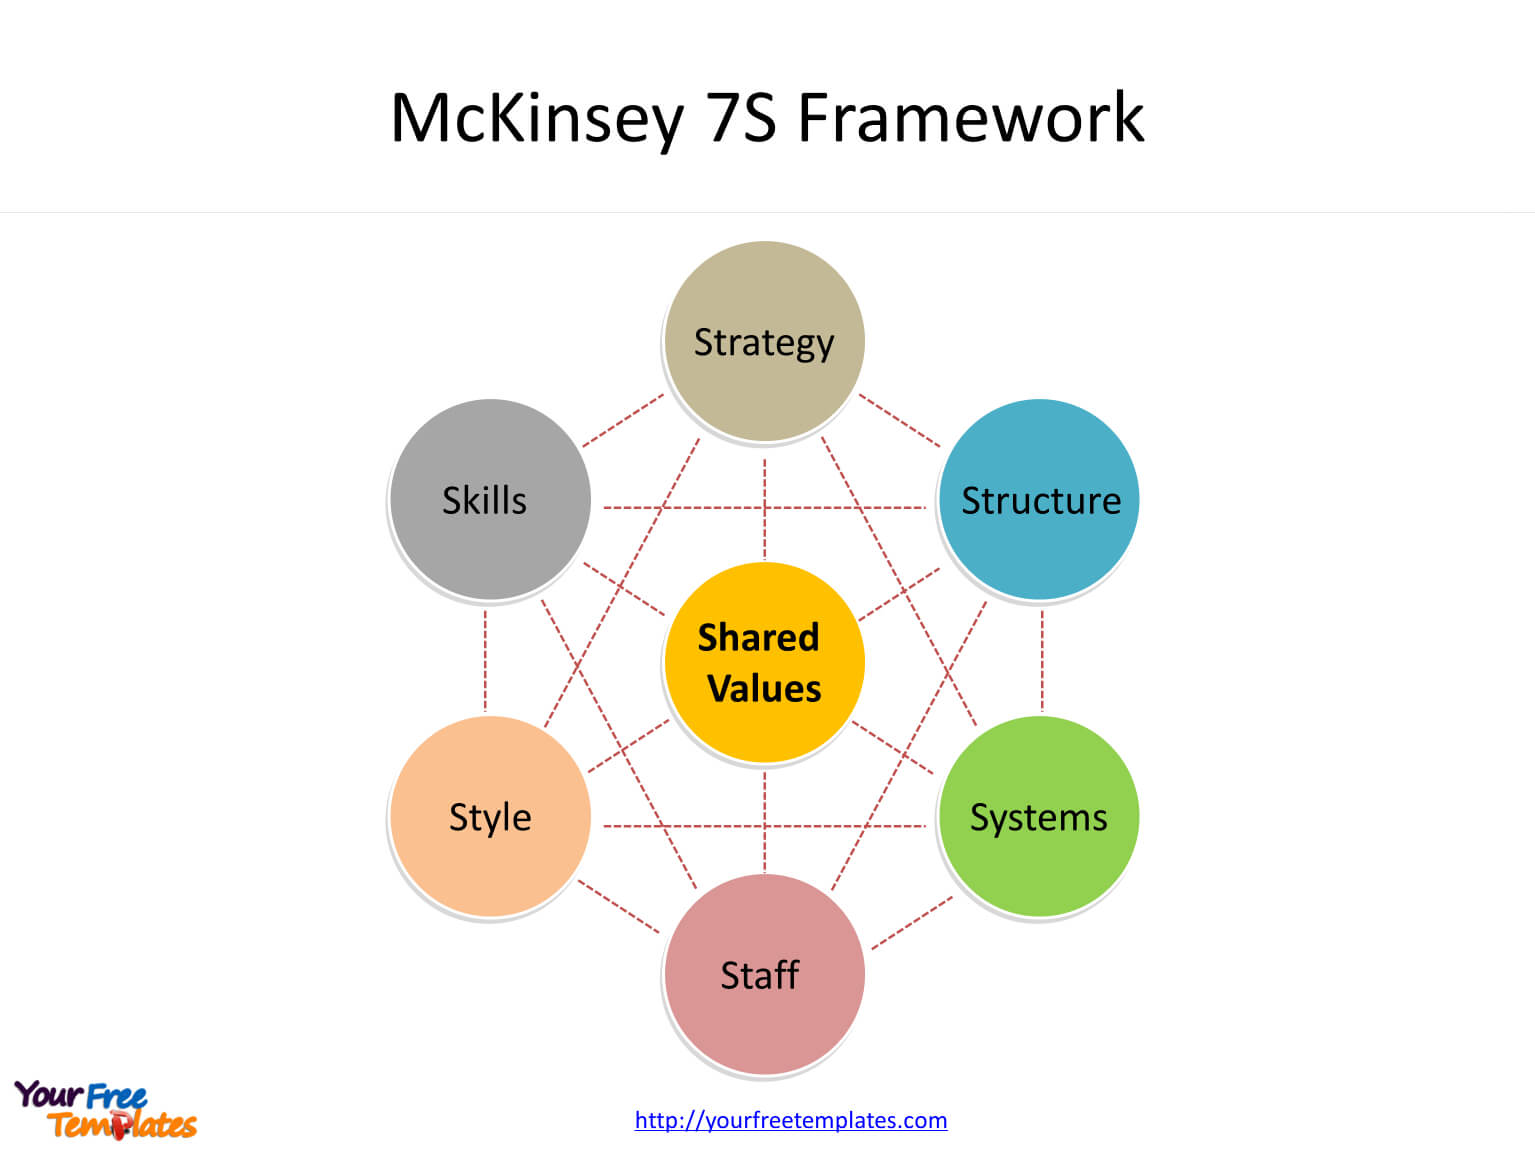 mckinsey-7s-framework-template-free-powerpoint-templates-throughout-mckinsey-consulting-report